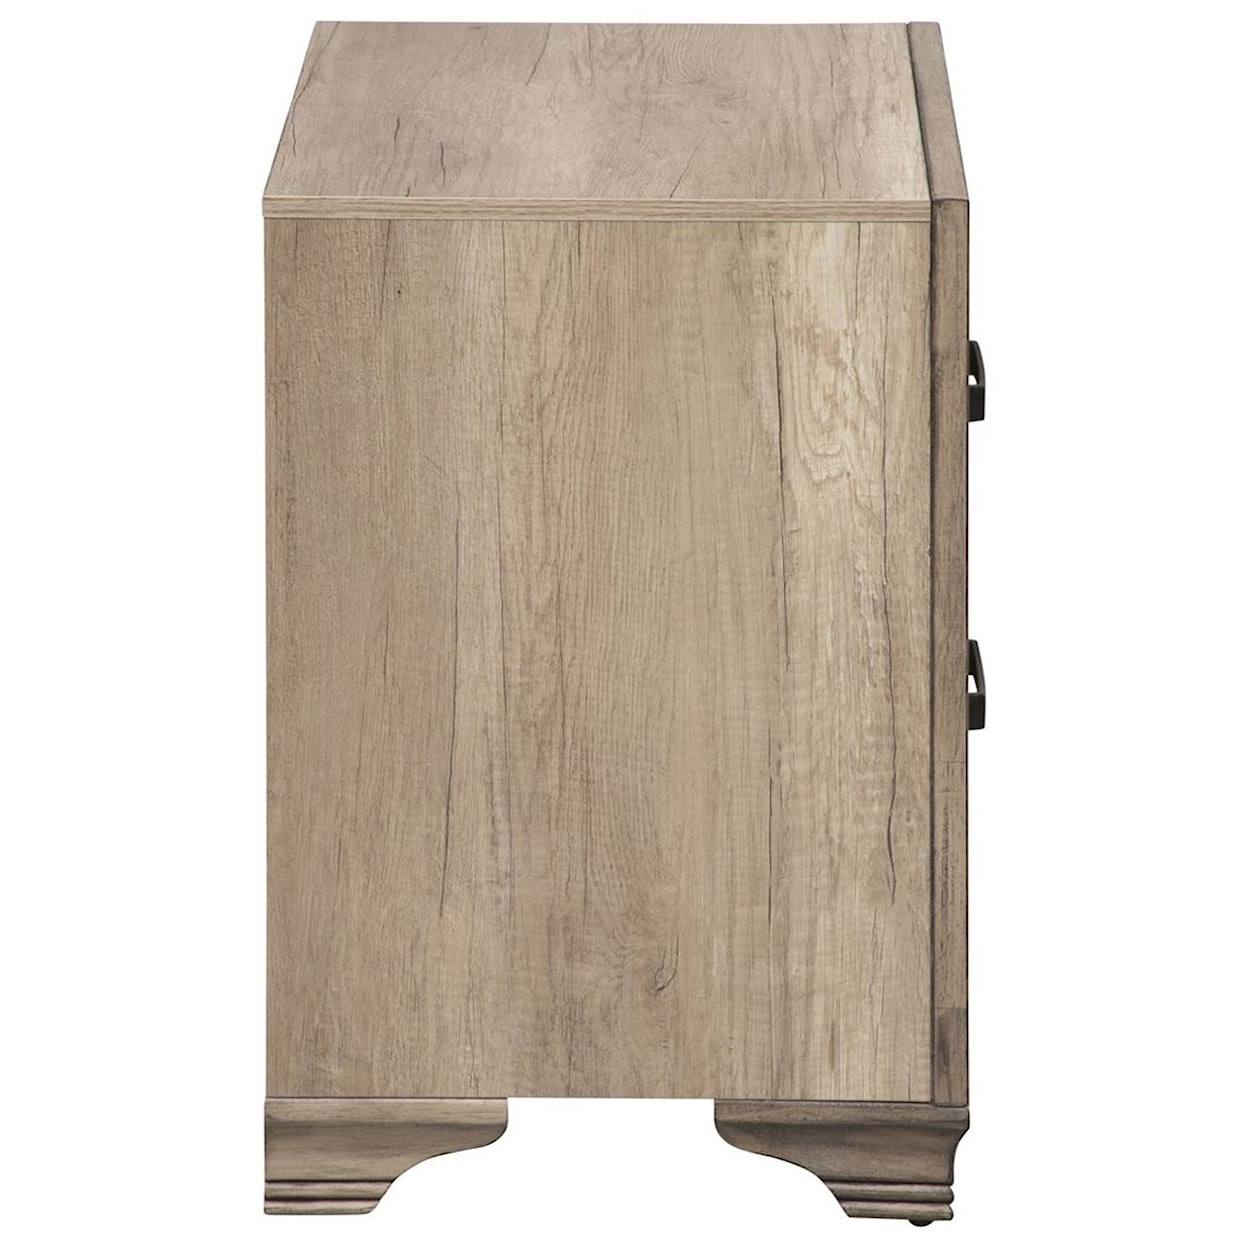 Liberty Furniture Sun Valley 2 Drawer Night Stand